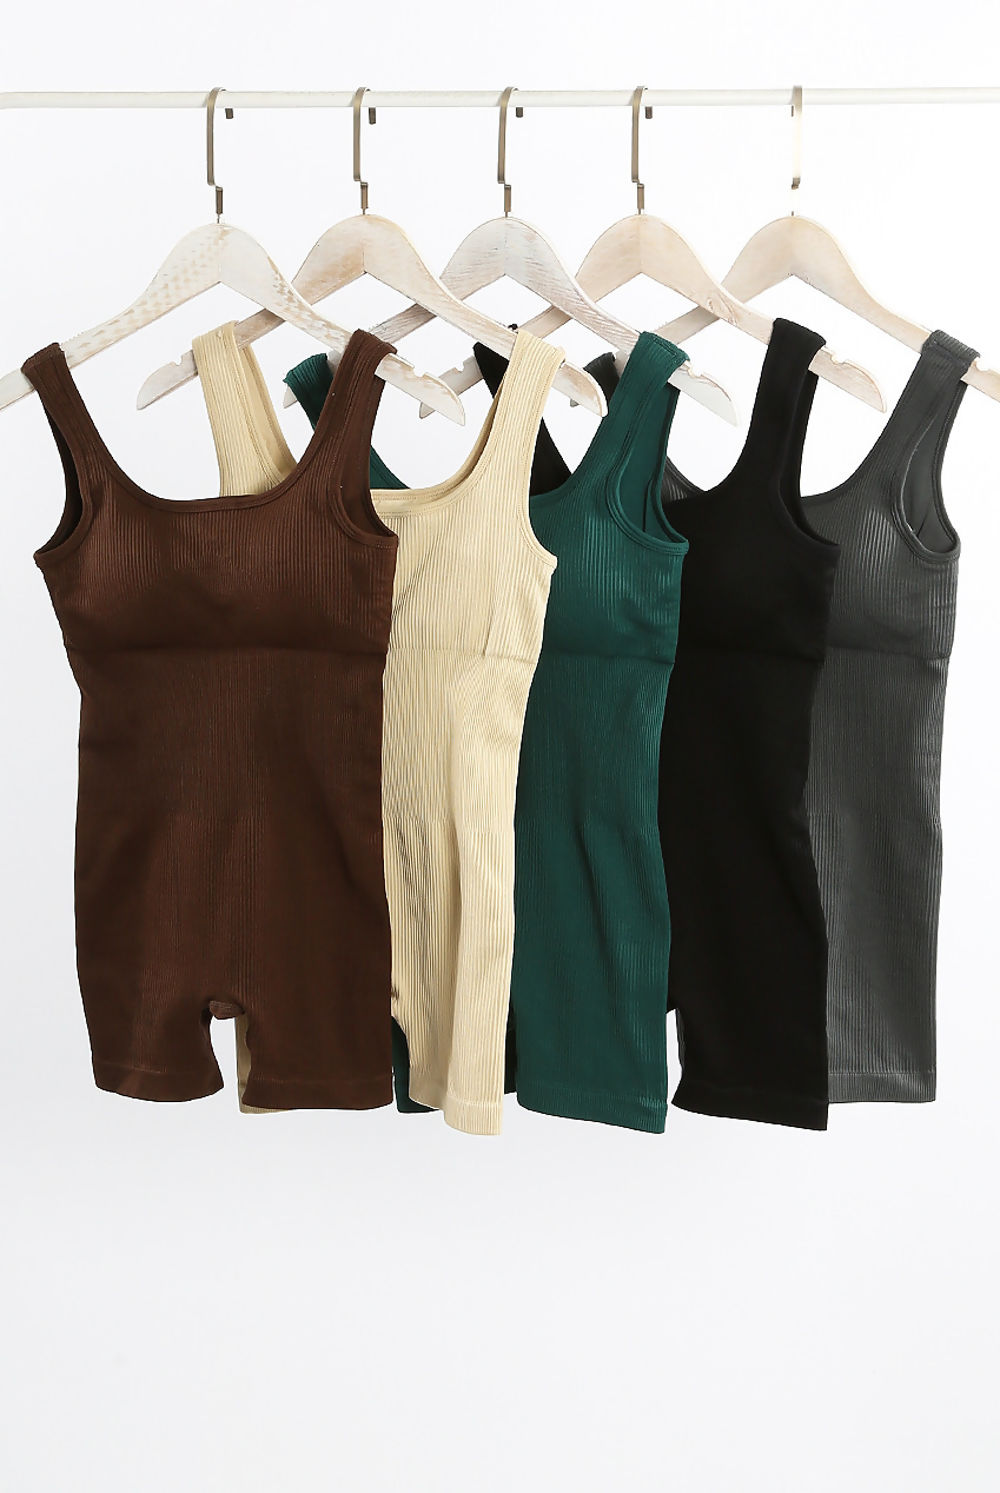 5 ribbed unitards handing on a pole. The colours of the unitard are: brown, cream, green, black and grey.